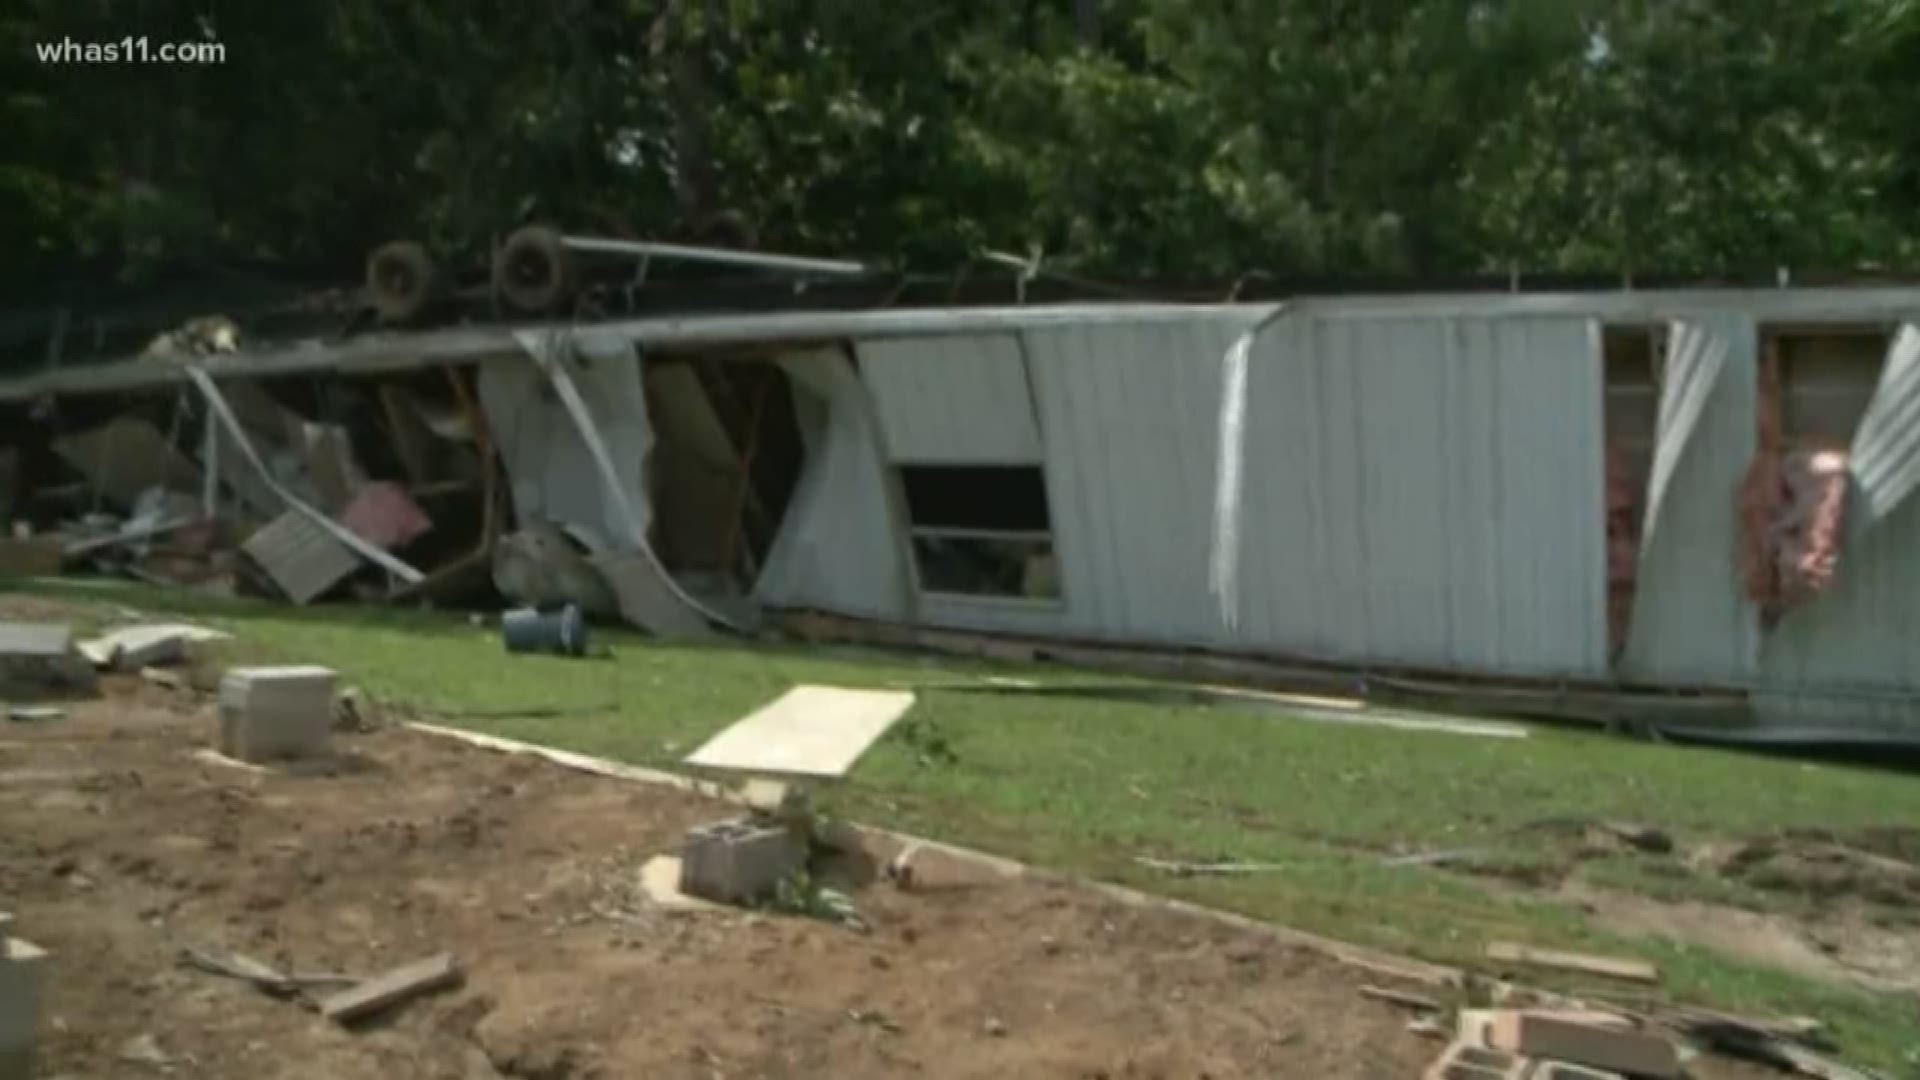 The tornado in Harrison County also hit two trailer homes on Payton Road, just outside New Middletown, Ind.